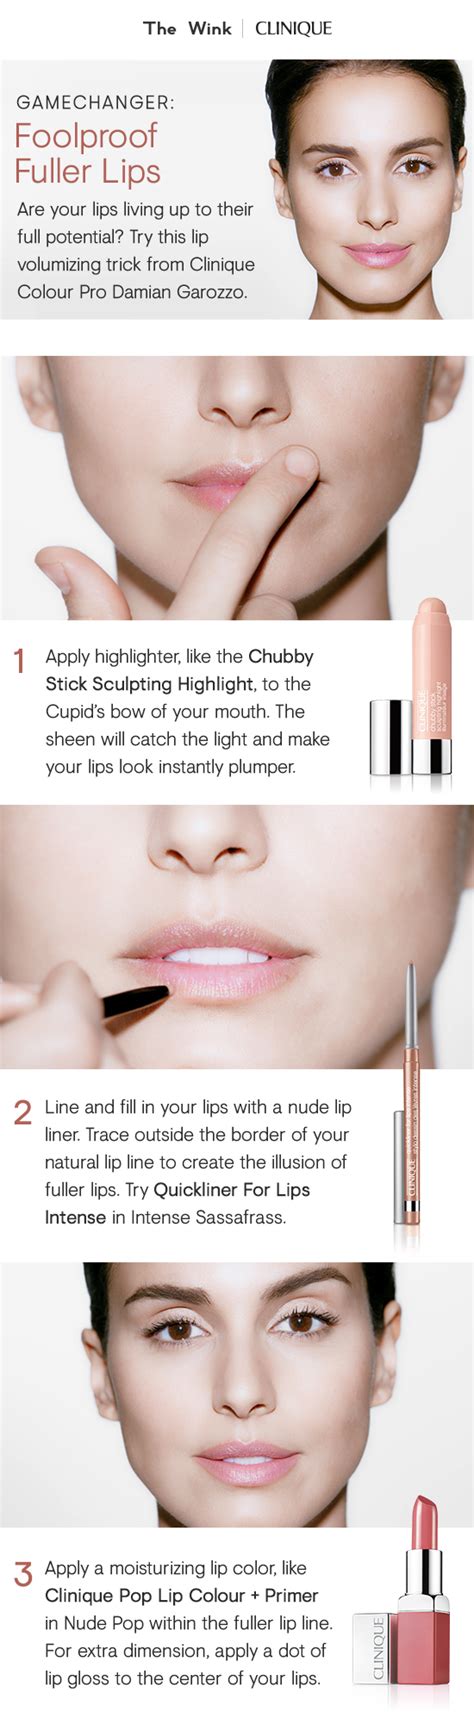 Achieve Fuller Lips Using Damian Garozzos Foolproof Tips Apply Clinique Chubby Stick Sculpting